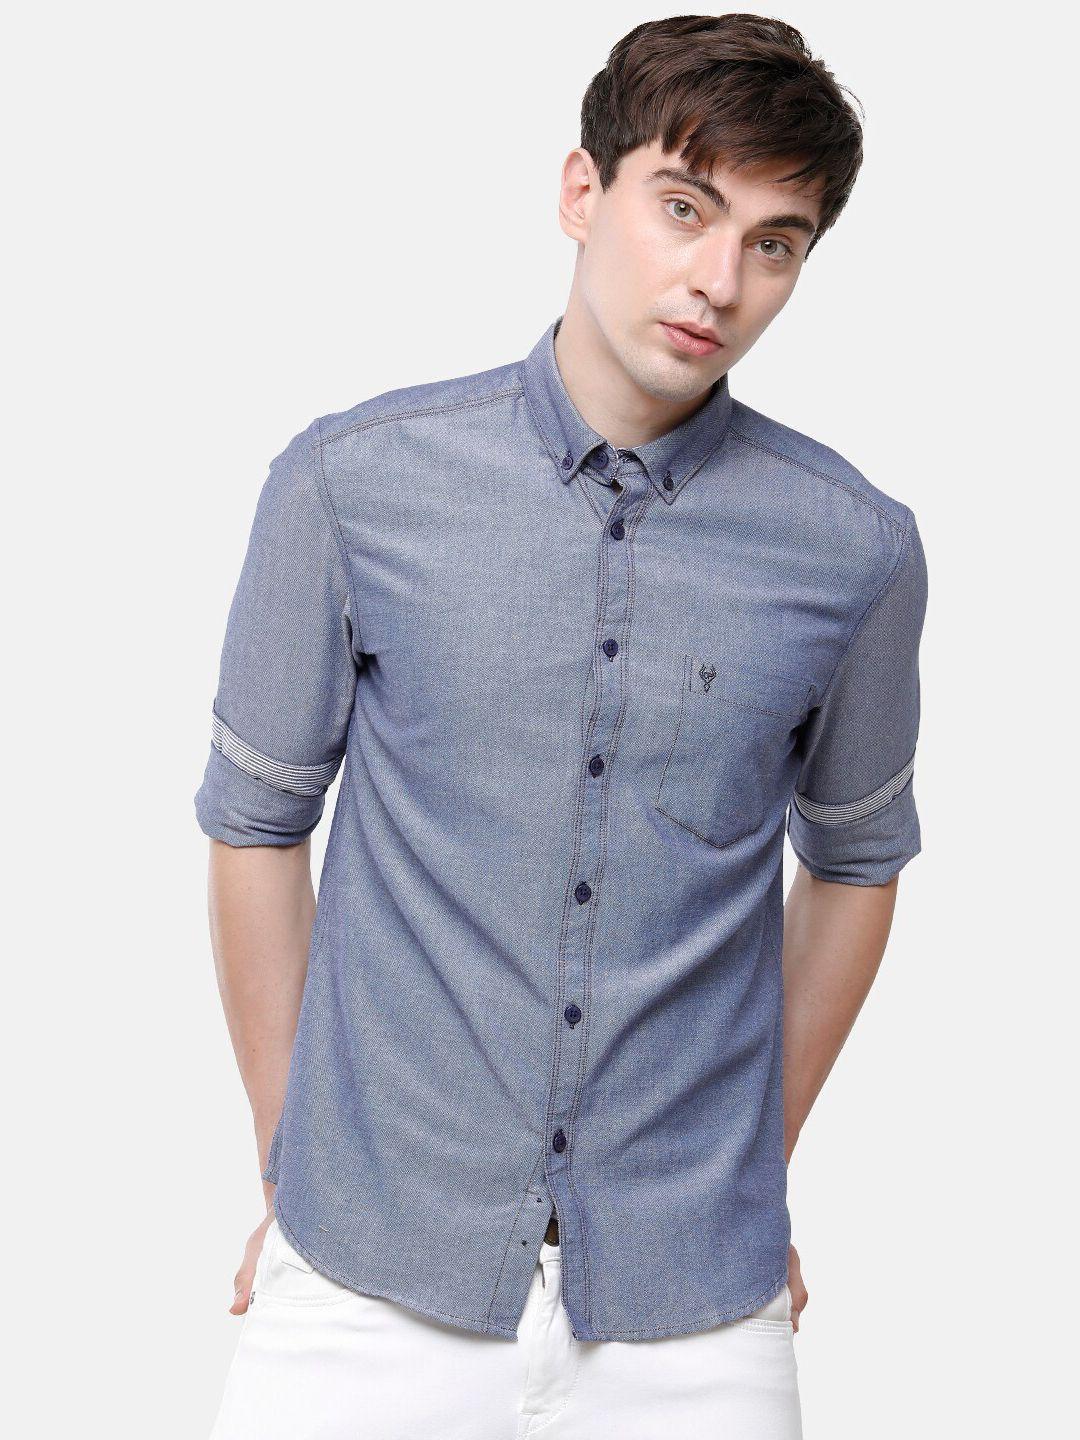 classic-polo-men-navy-blue-slim-fit-casual-shirt